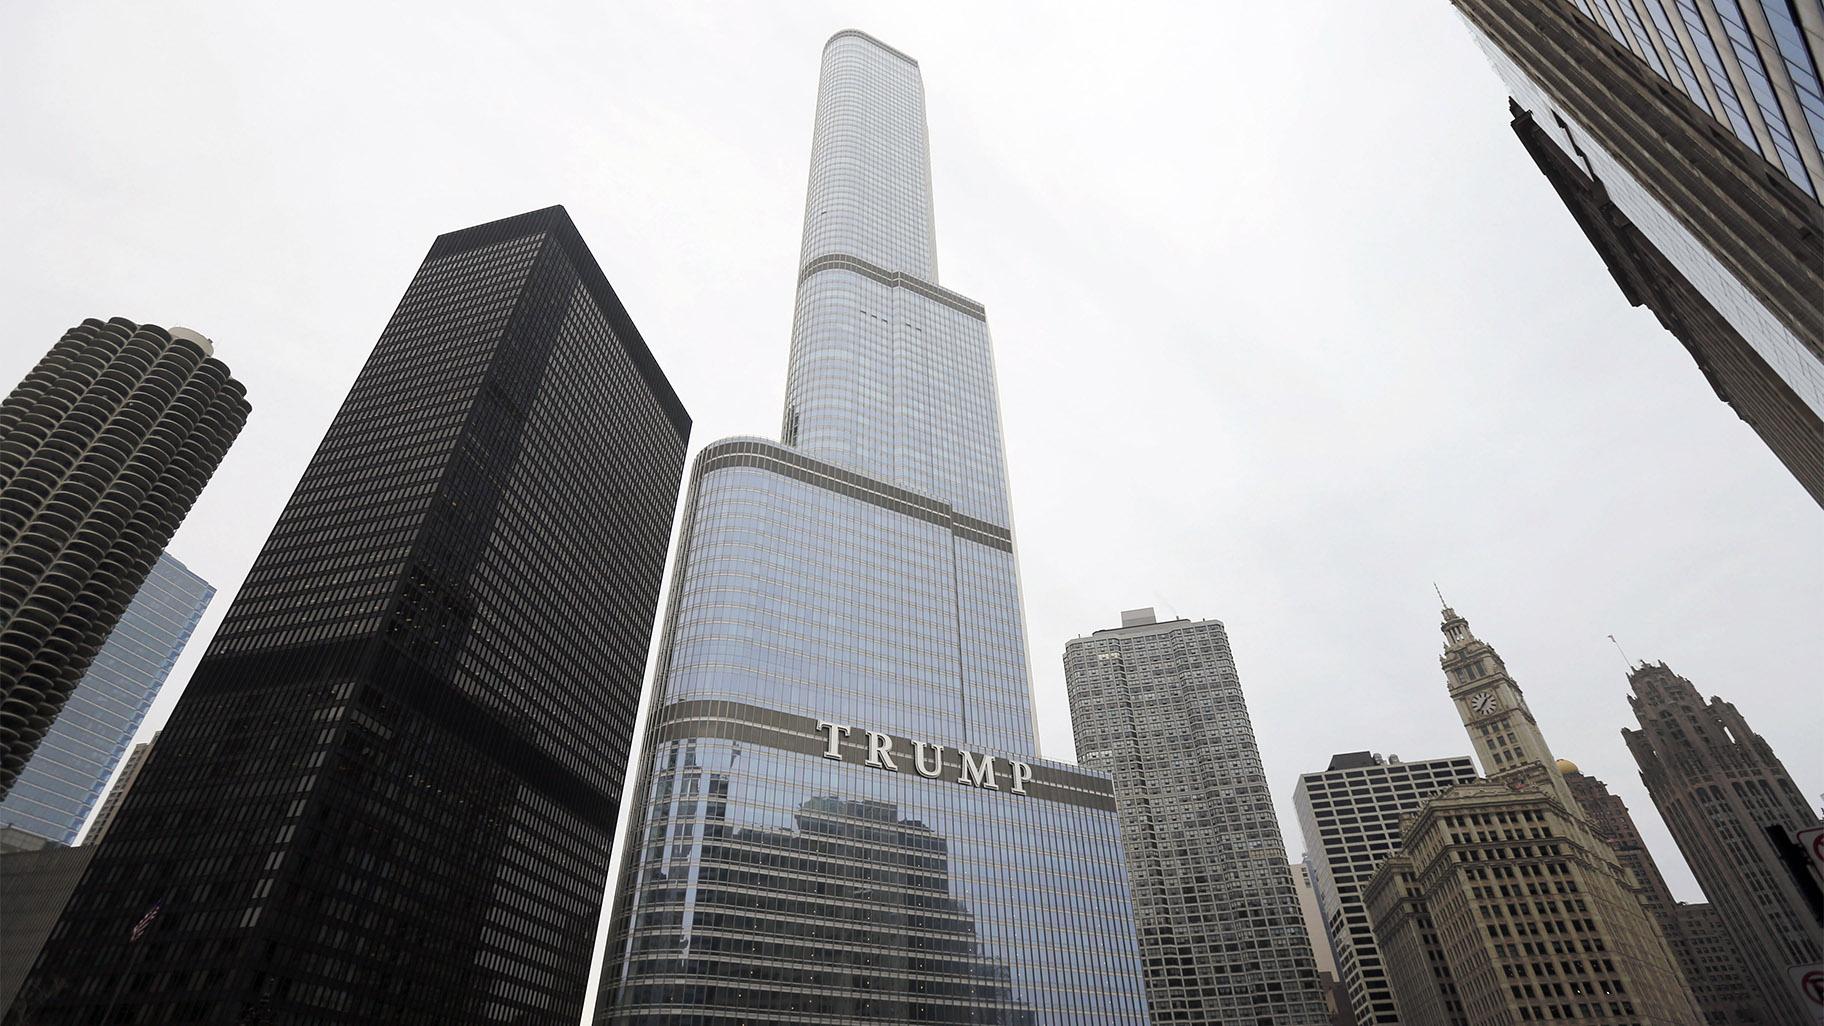 This Thursday, March 10, 2016 file photo shows the Trump International Hotel and Tower in Chicago. An Illinois tax agency has ruled that former President Donald Trump is due a  million refund on the 2011 tax bill on his downtown Chicago skyscraper, but local officials are trying to block the refund. (AP Photo / Charles Rex Arbogast, File)